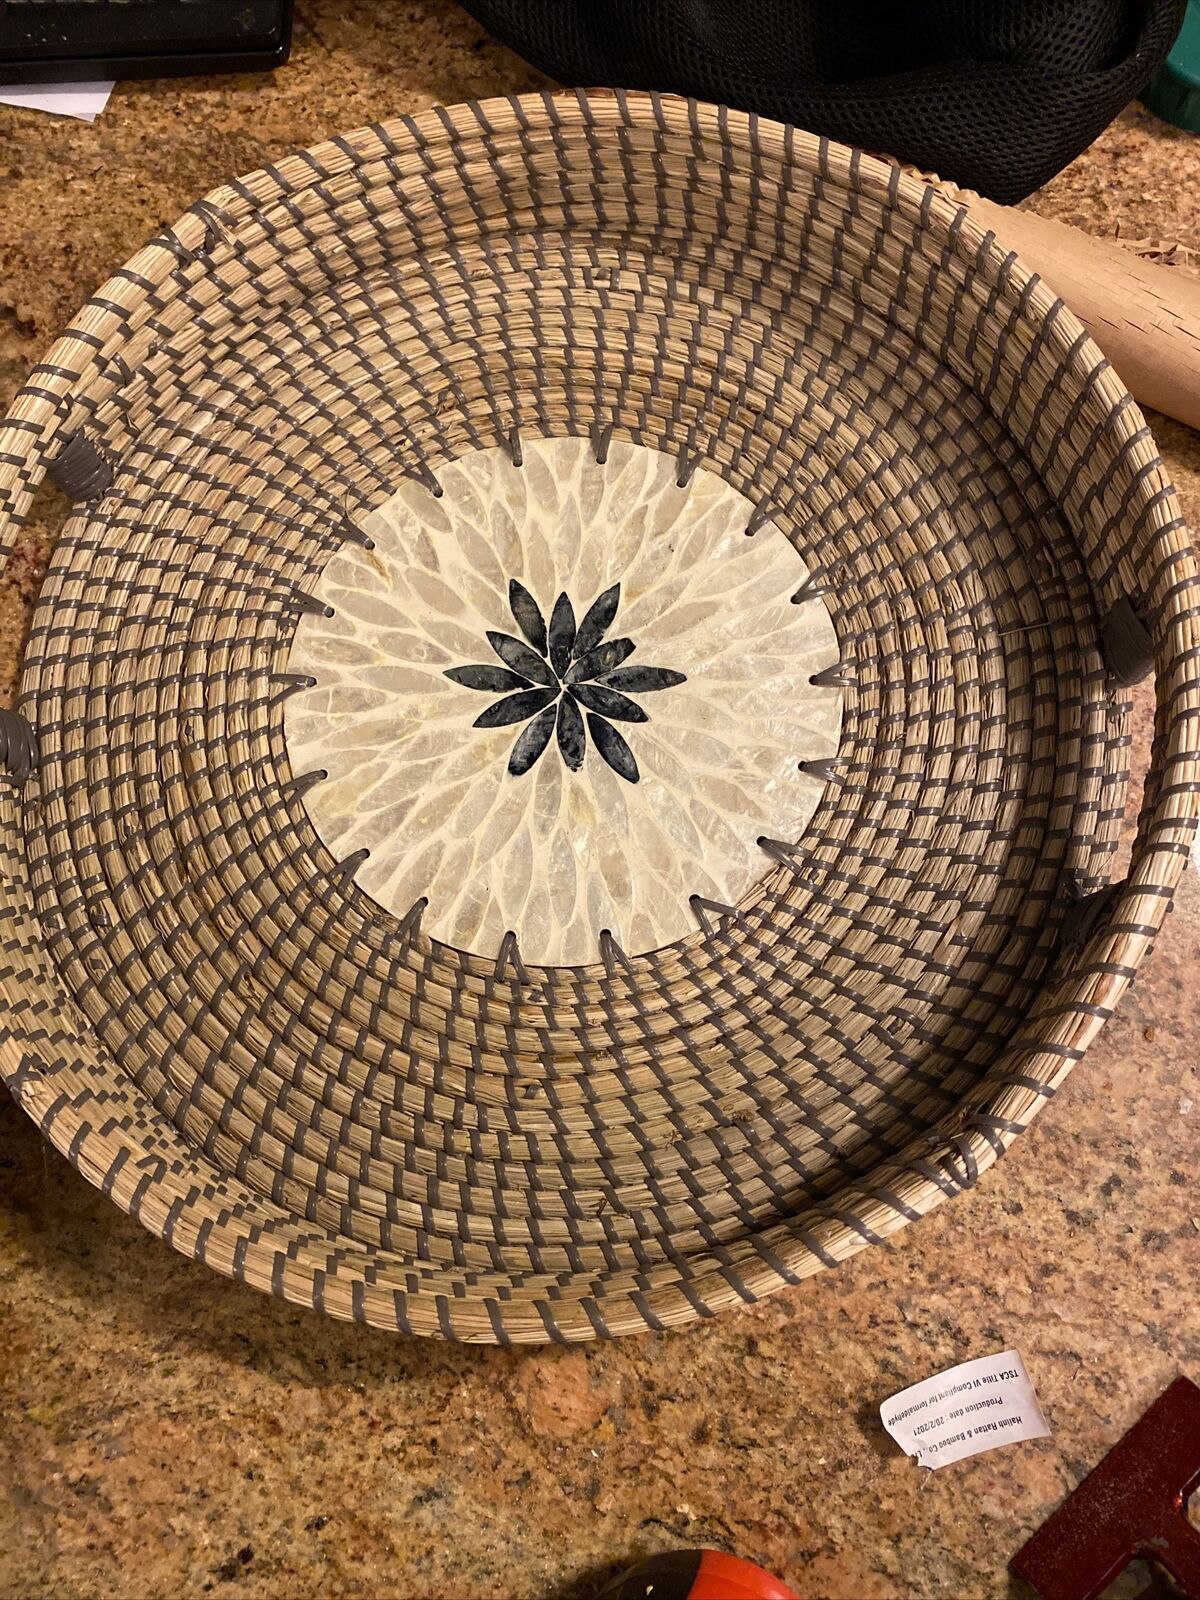 Sweetgrass Fruit & Bread Tray With Shell Like Inlay, Double Handled Rattan Weave